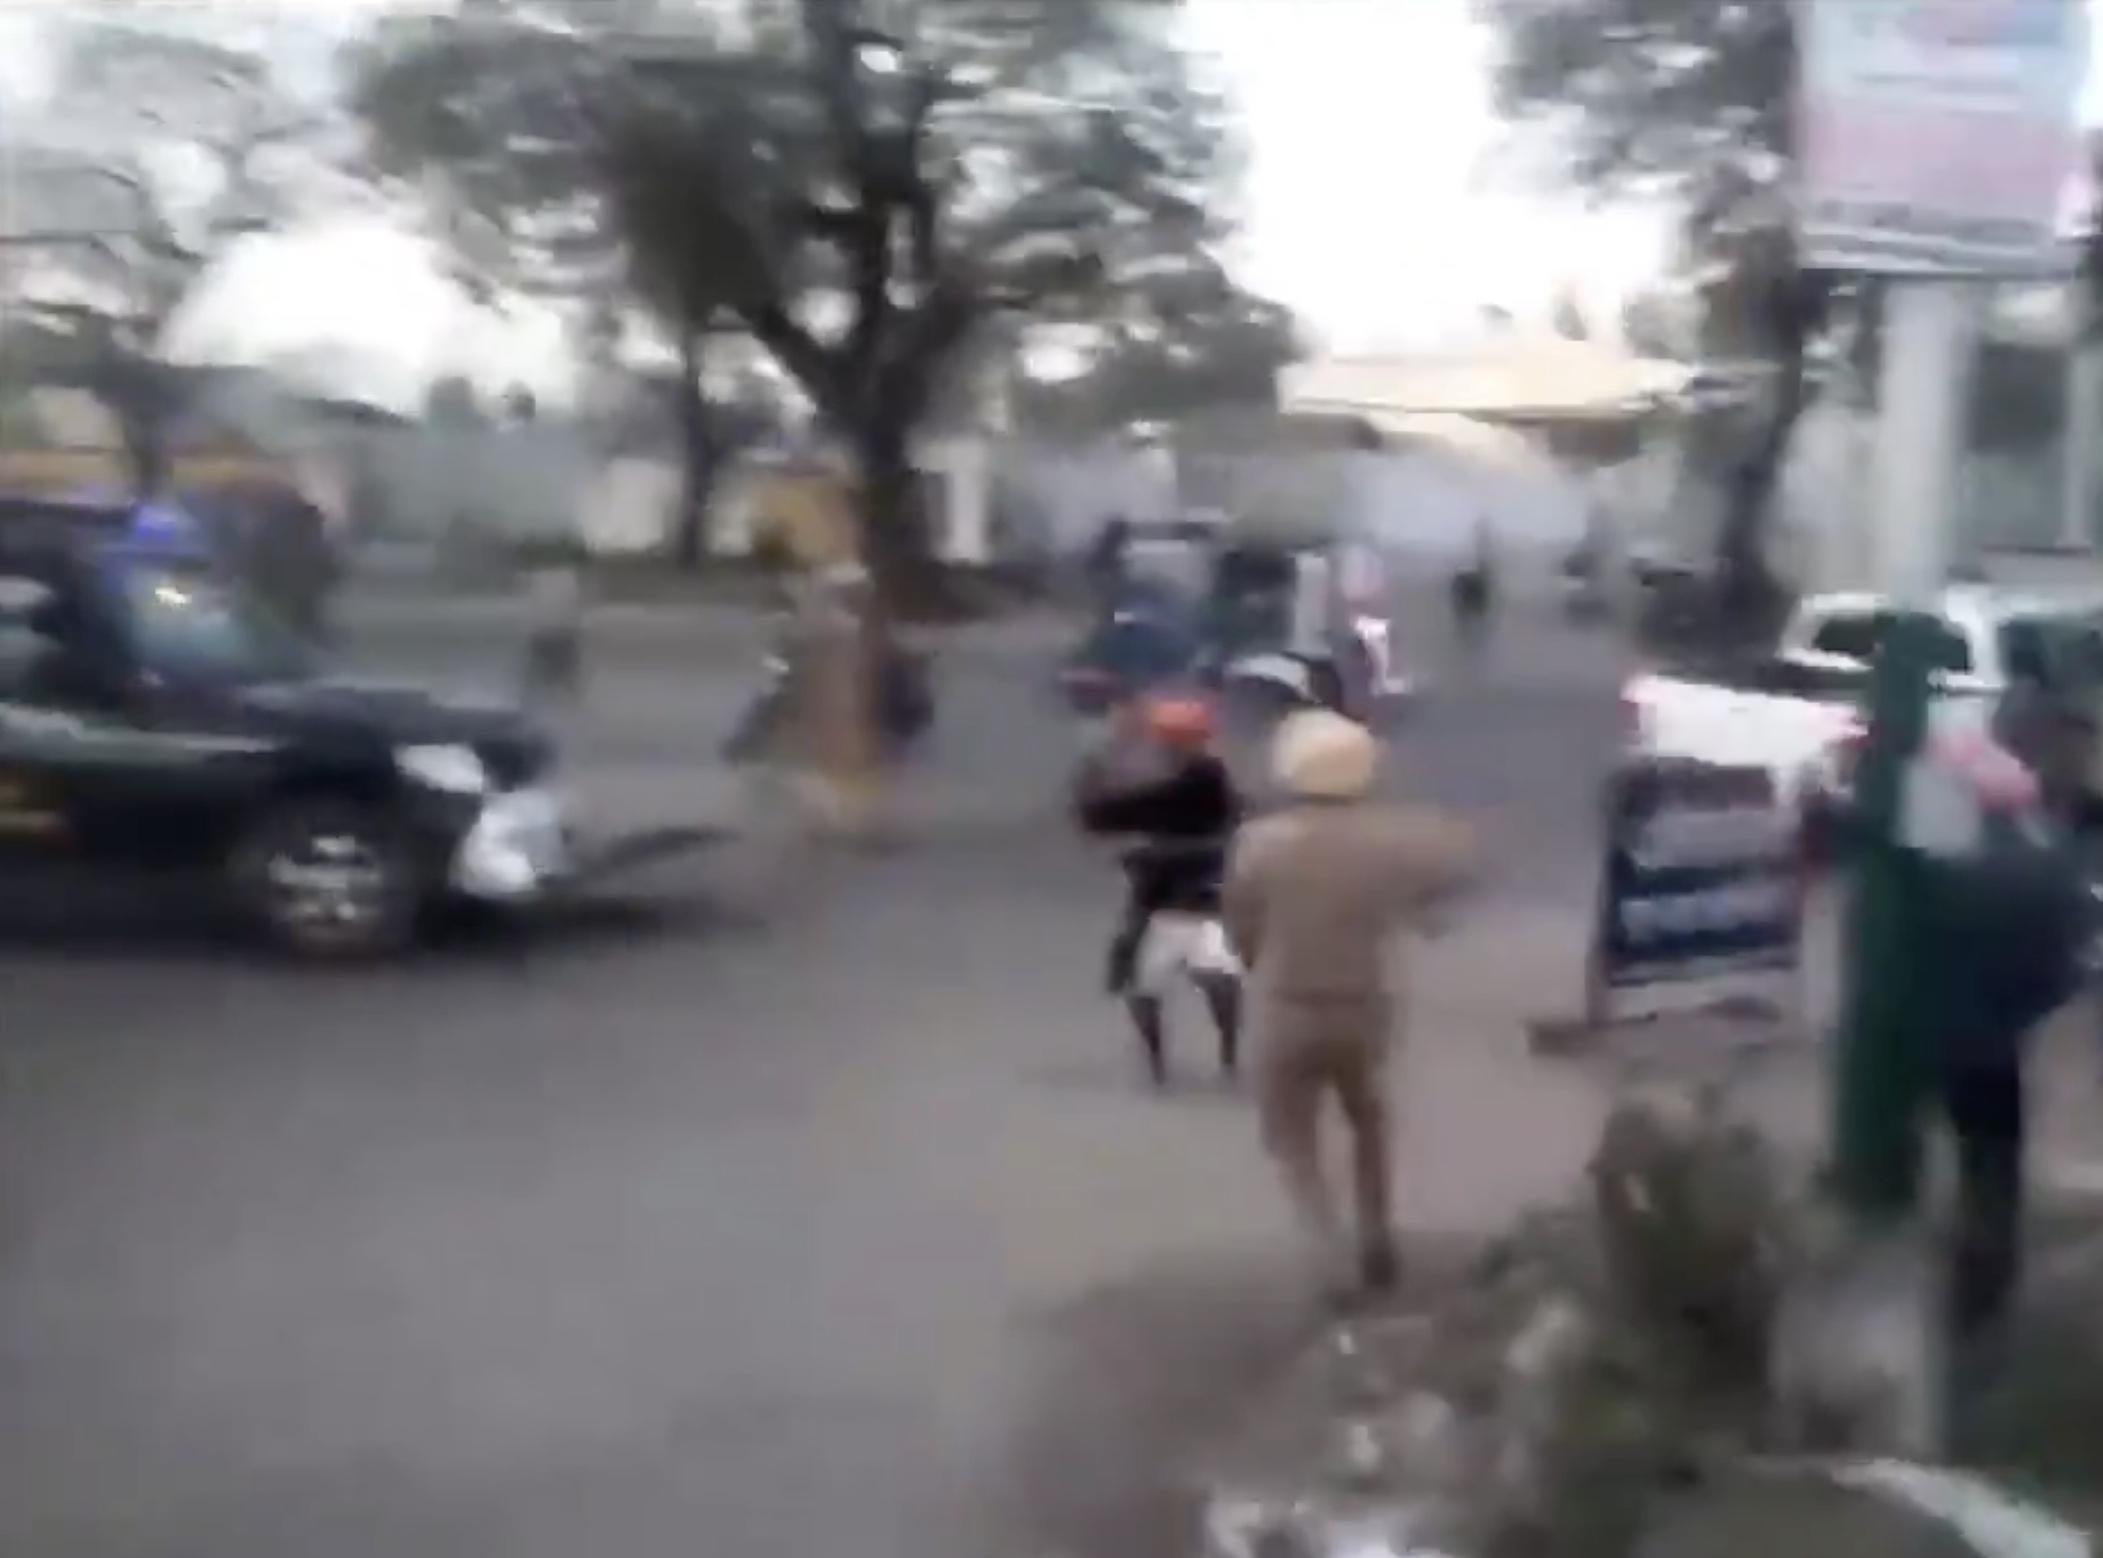 Video of the moment police in Punjab were attacked has been shared widely on Indian social media